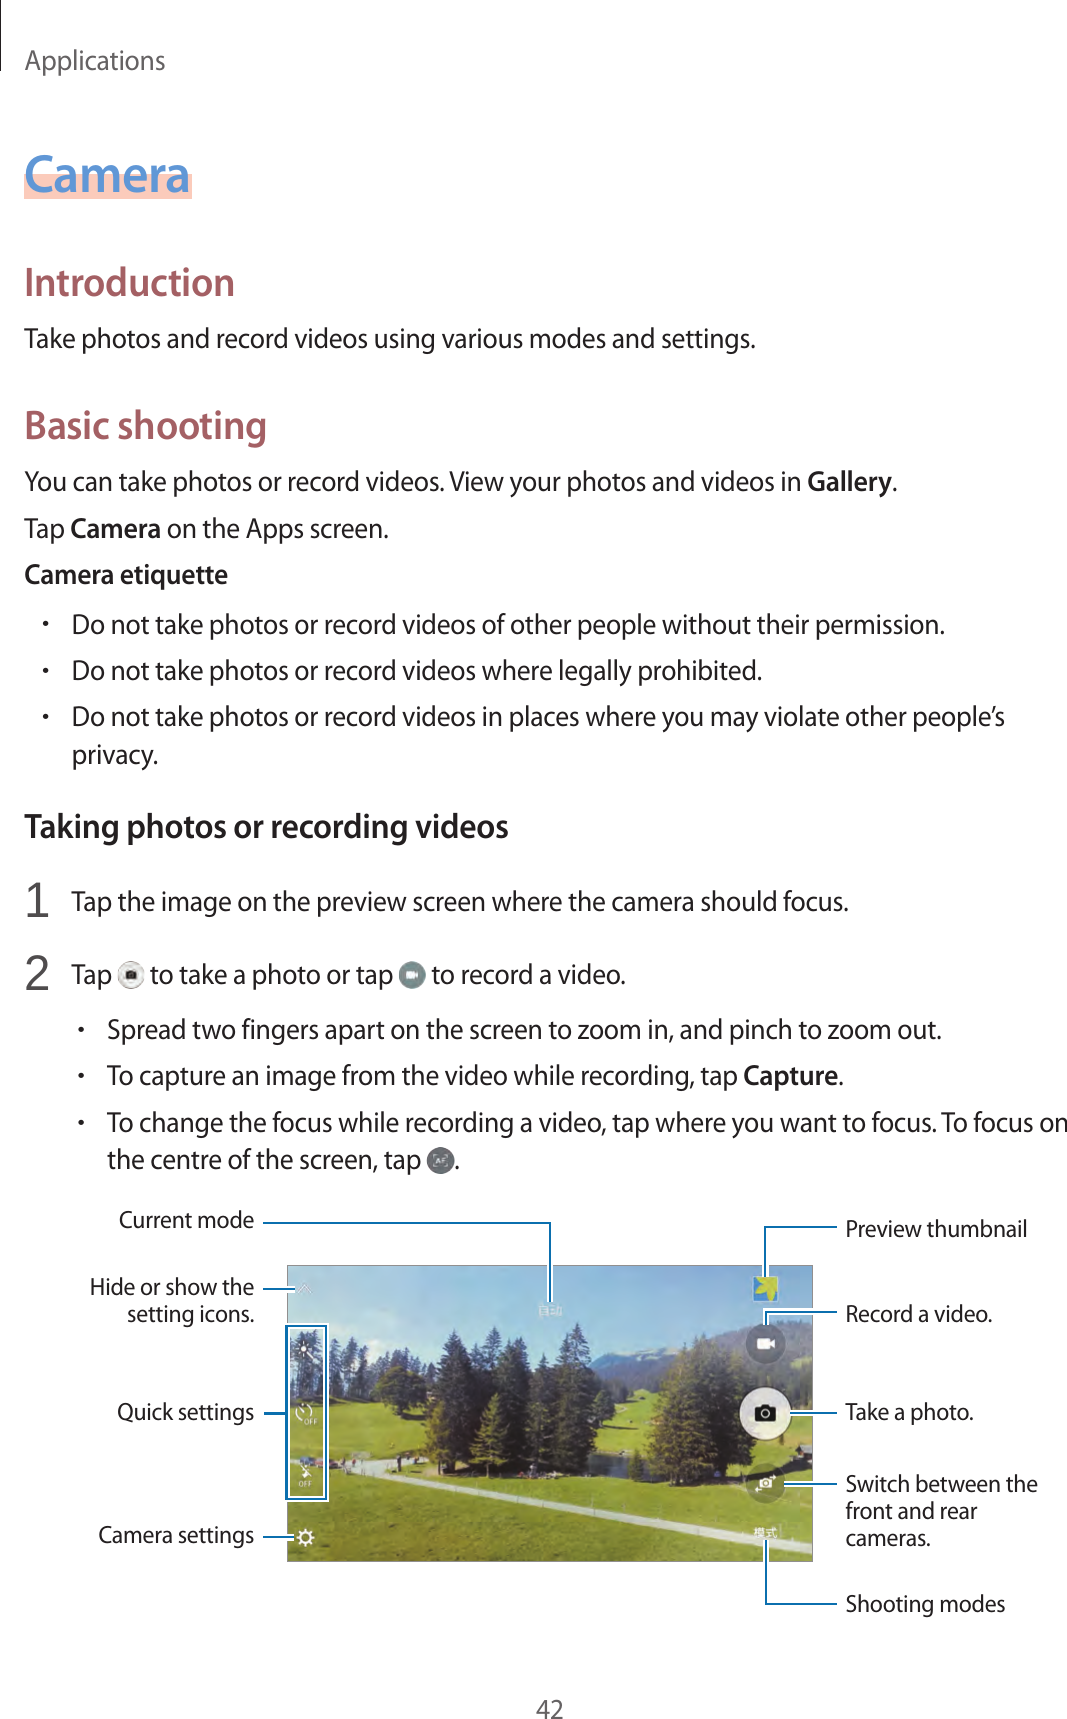 Applications42CameraIntroductionTake photos and record videos using various modes and settings.Basic shootingYou can take photos or record videos. View your photos and videos in Gallery.Tap Camera on the Apps screen.Camera etiquette•Do not take photos or record videos of other people without their permission.•Do not take photos or record videos where legally prohibited.•Do not take photos or record videos in places where you may violate other people’s privacy.Taking photos or recording videos1  Tap the image on the preview screen where the camera should focus.2  Tap   to take a photo or tap   to record a video.•Spread two fingers apart on the screen to zoom in, and pinch to zoom out.•To capture an image from the video while recording, tap Capture.•To change the focus while recording a video, tap where you want to focus. To focus on the centre of the screen, tap  .Camera settingsHide or show the setting icons.Quick settingsRecord a video.Take a photo.Switch between the front and rear cameras.Shooting modesPreview thumbnailCurrent mode